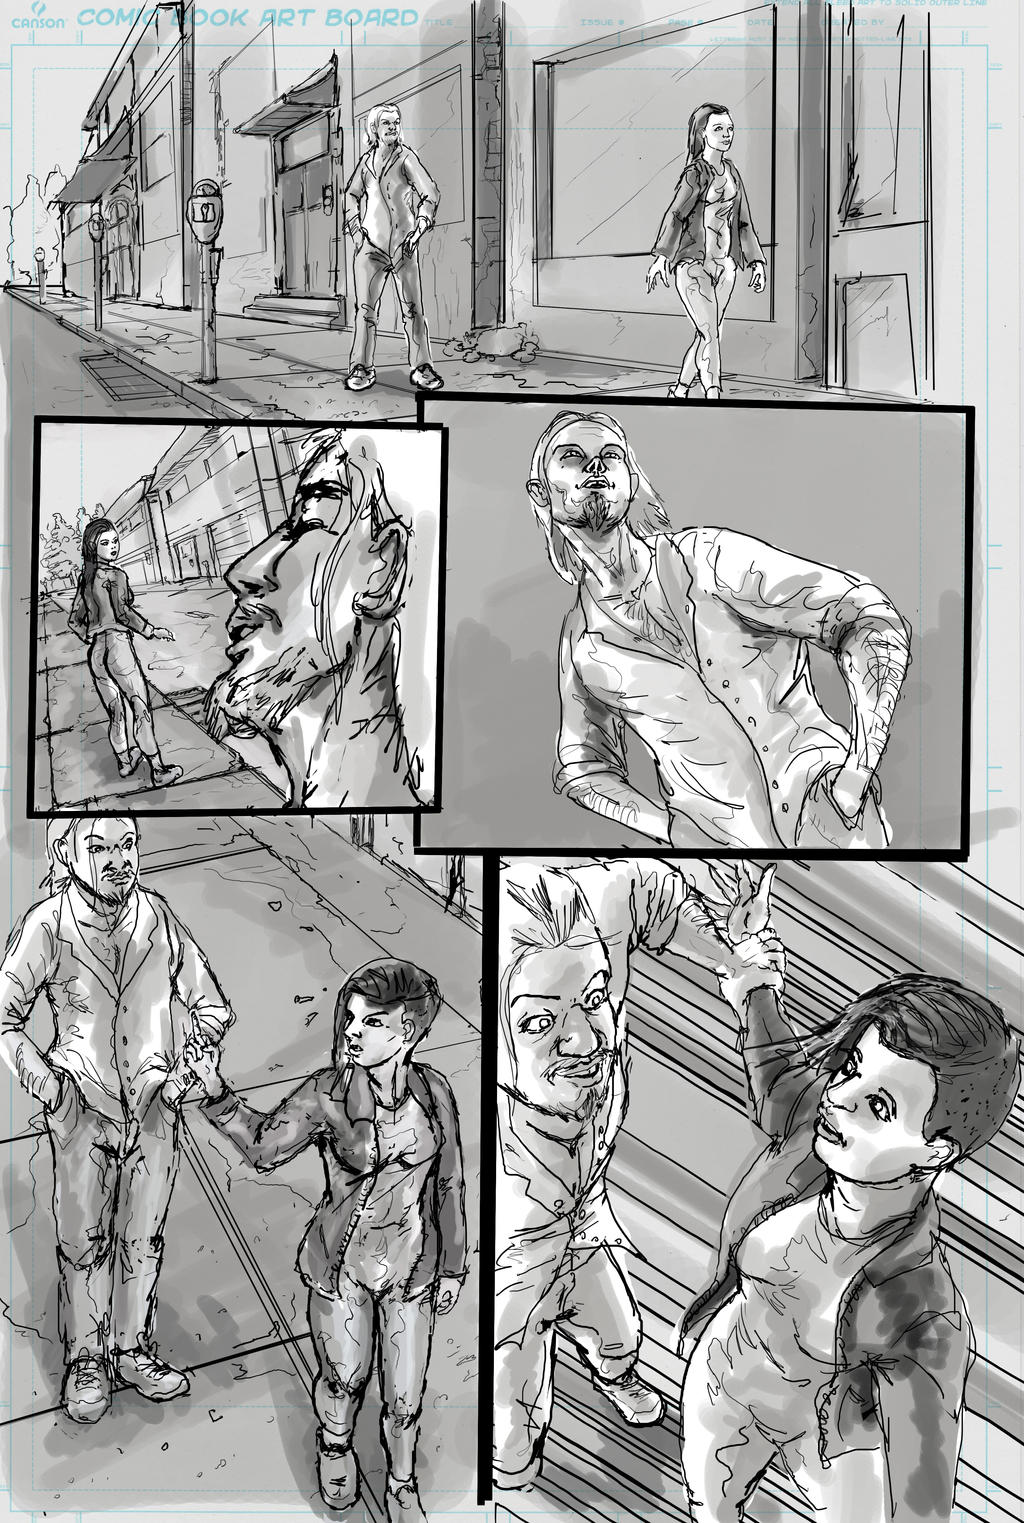 Top cow talent hunt Postal issue 9 page 10 final